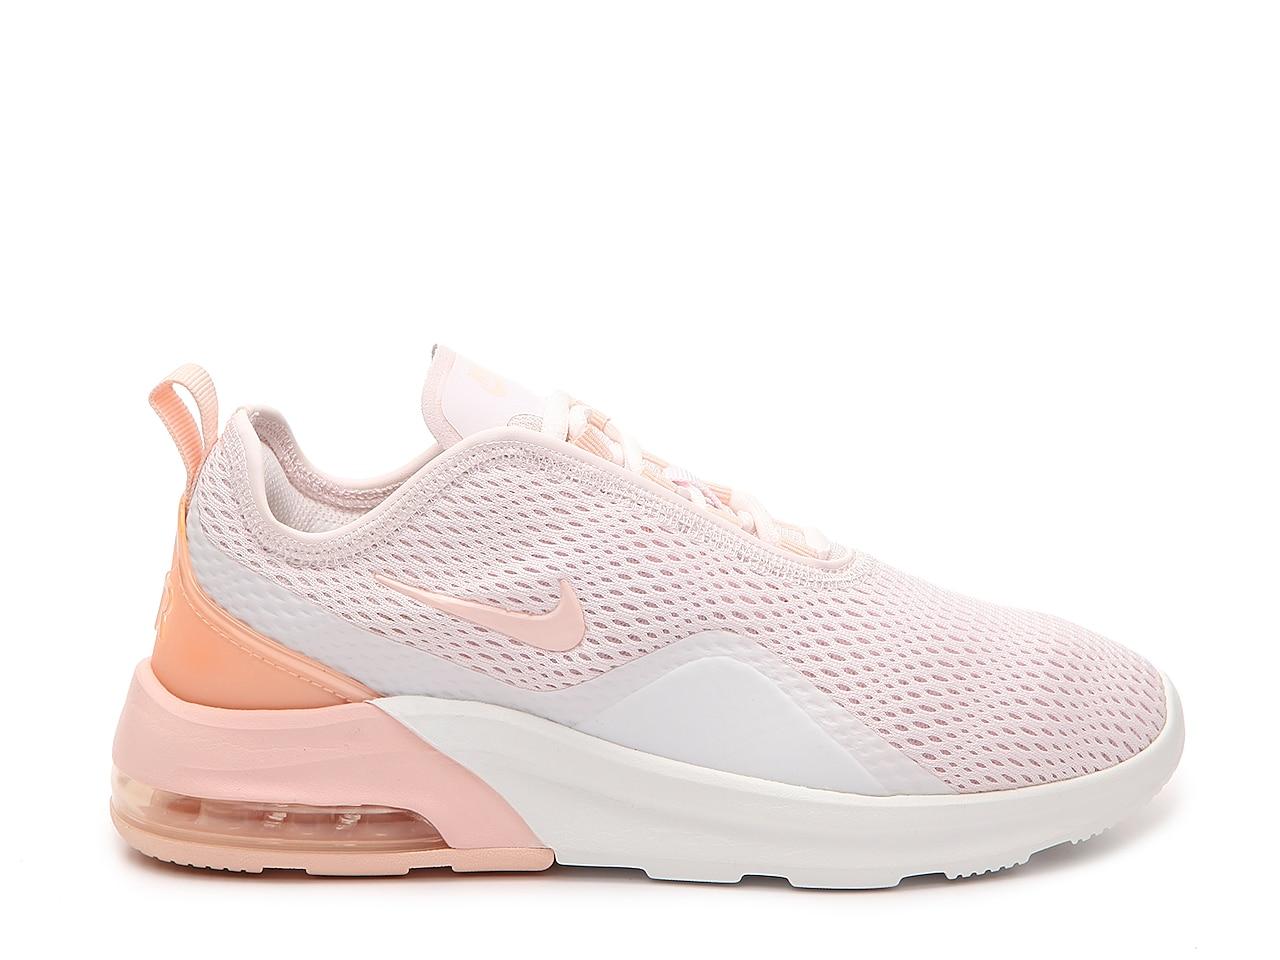 nike air max motion 2 women's pink and blue